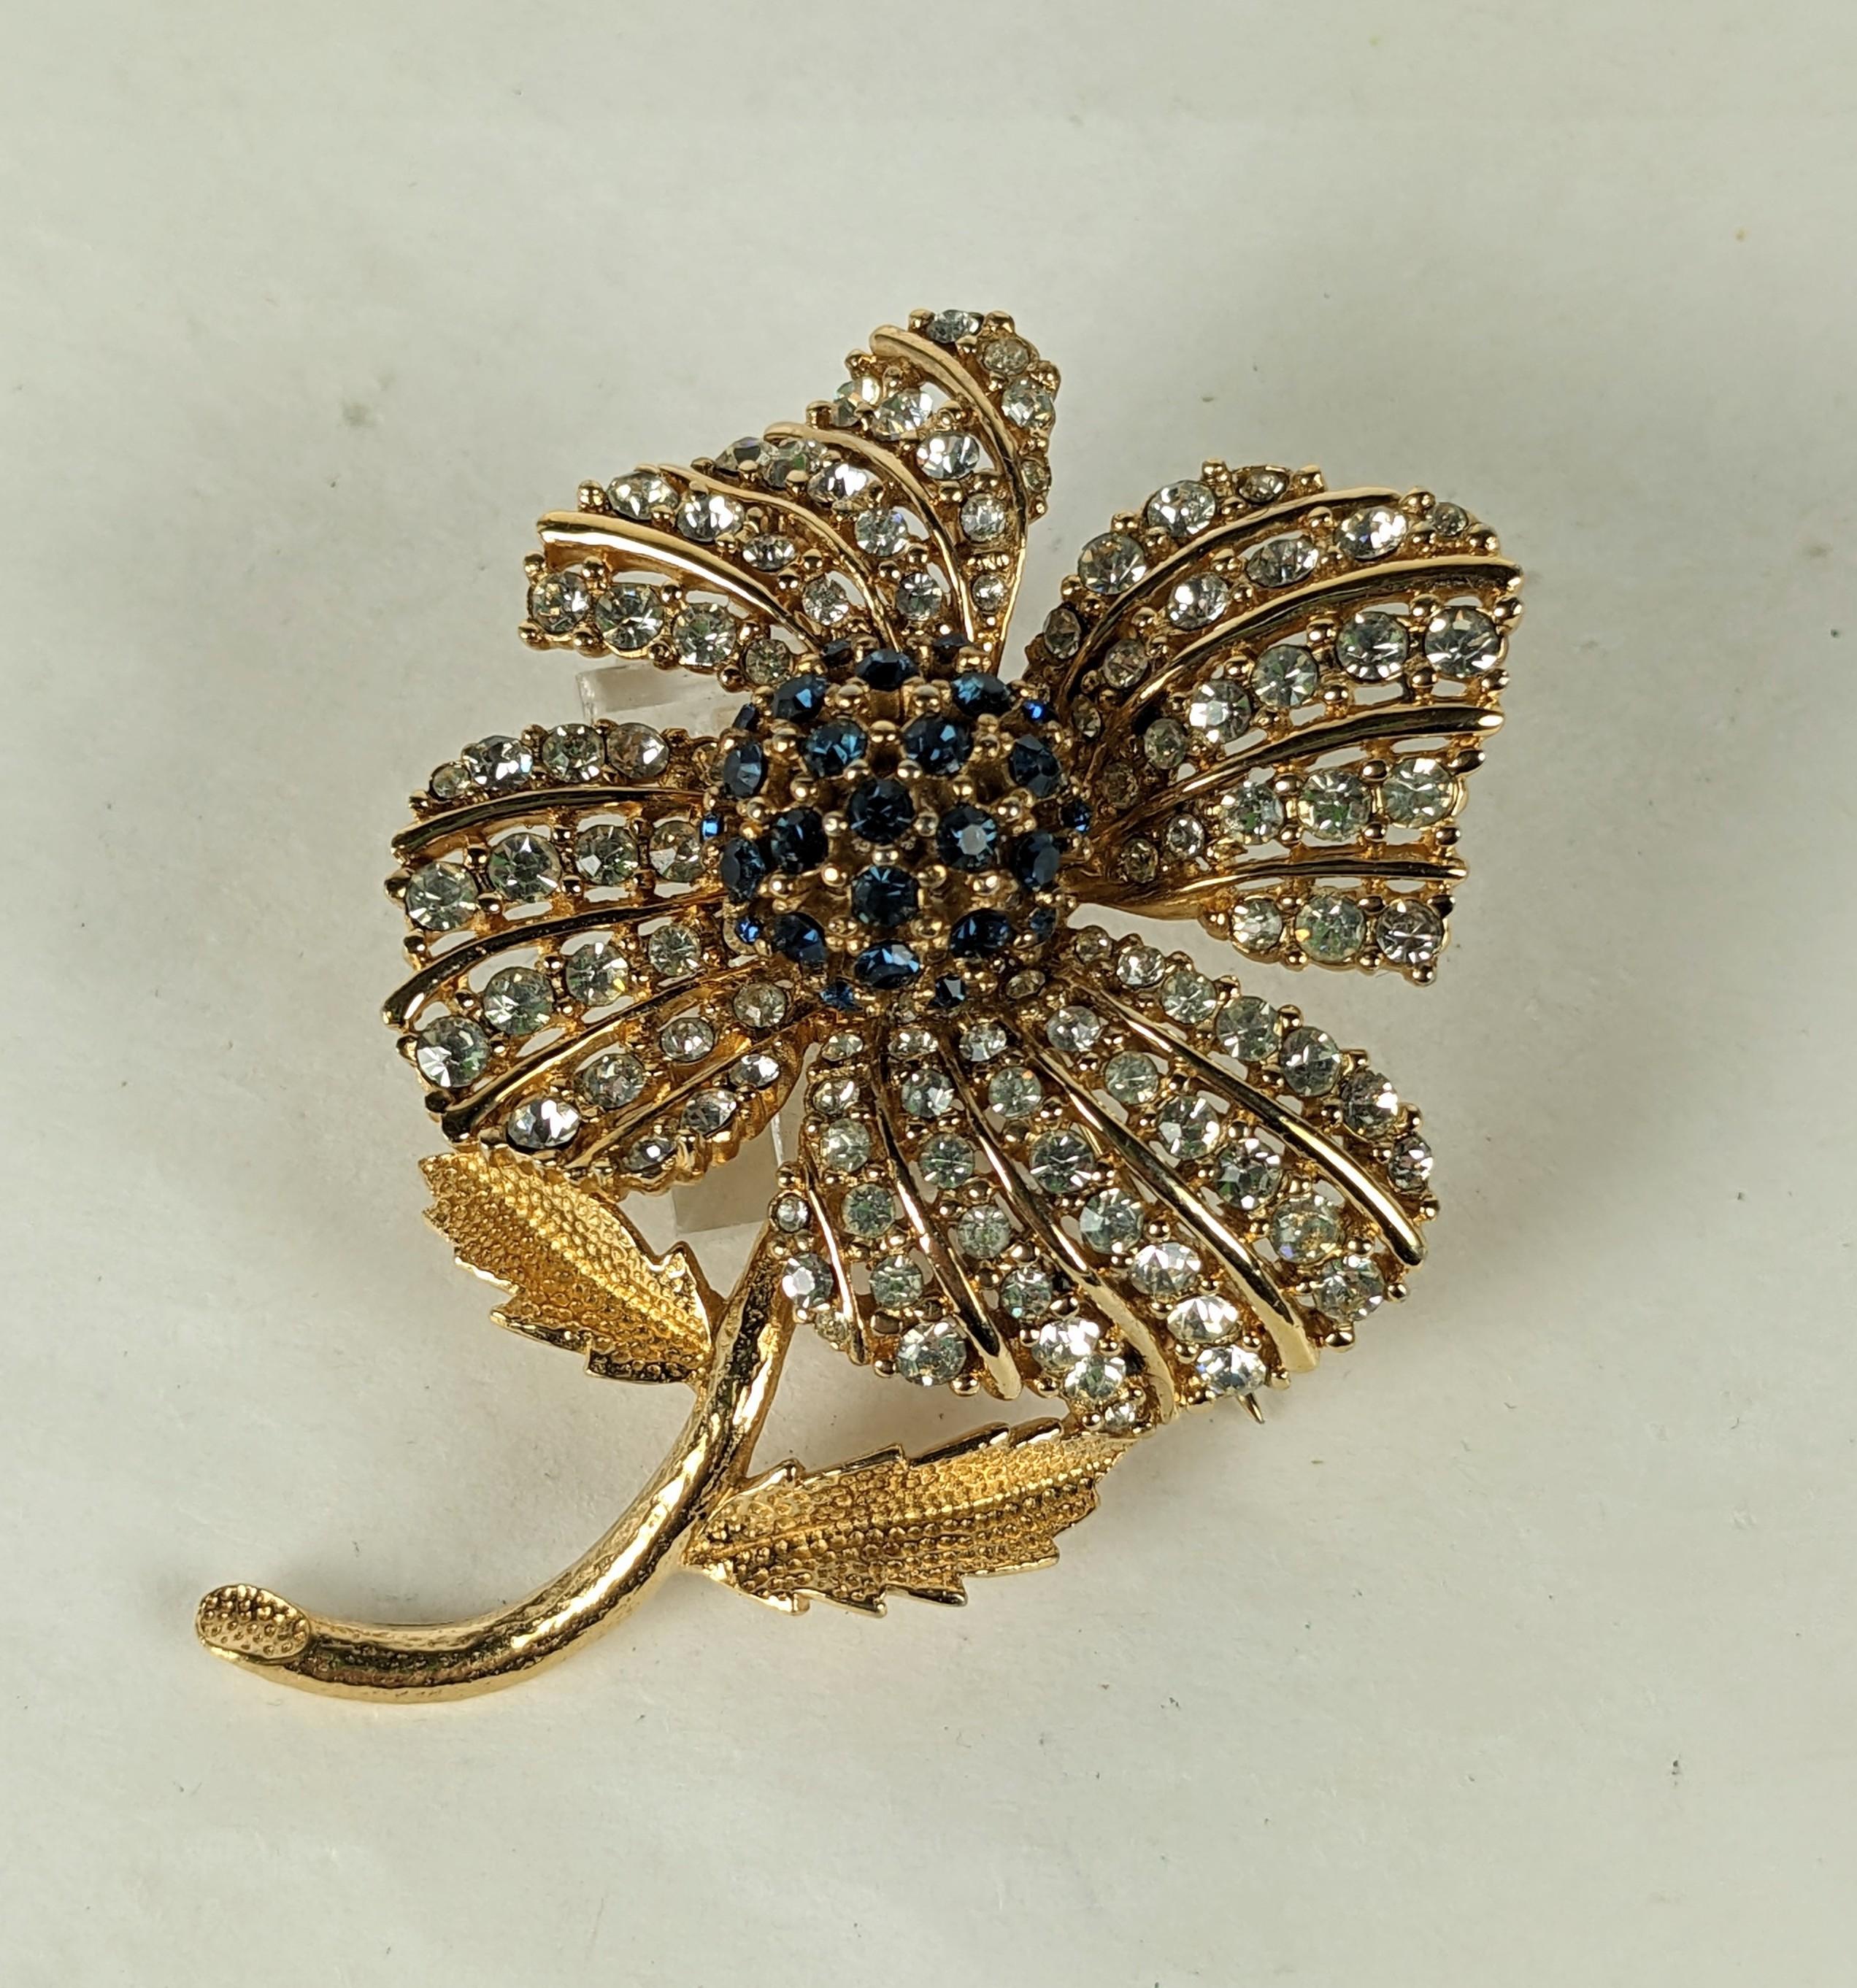 Charming Ciner Dimensional Flower Brooch from the 1960's. Elaborate pave work with crystal petals and central faux sapphire bud on gilt metal. 
2.5